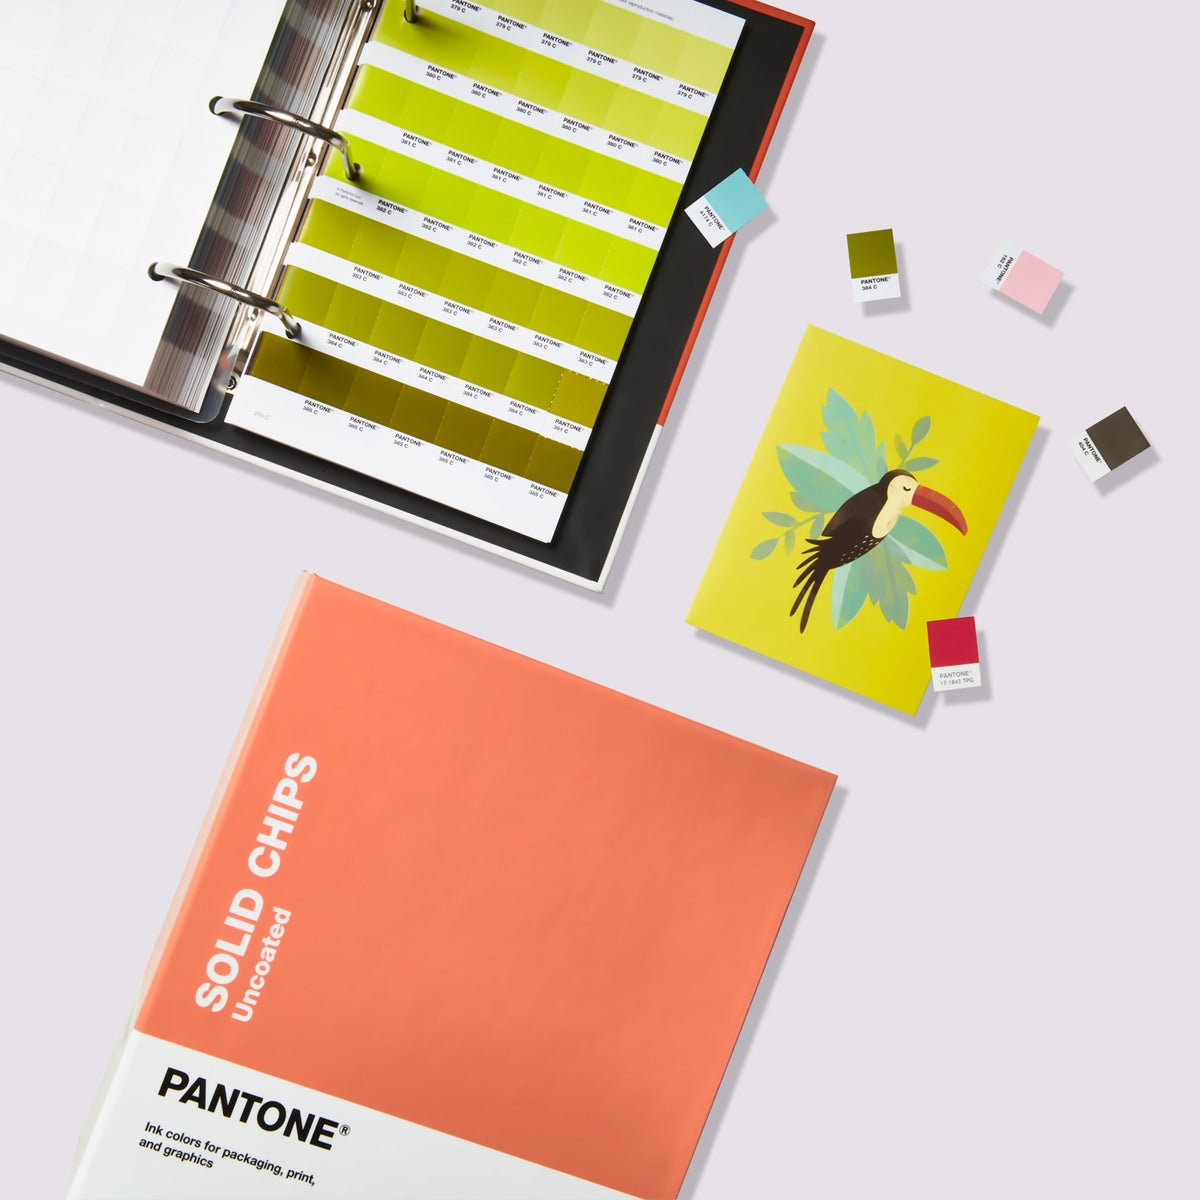 PANTONE SOLID CHIPS | COATED & UNCOATED